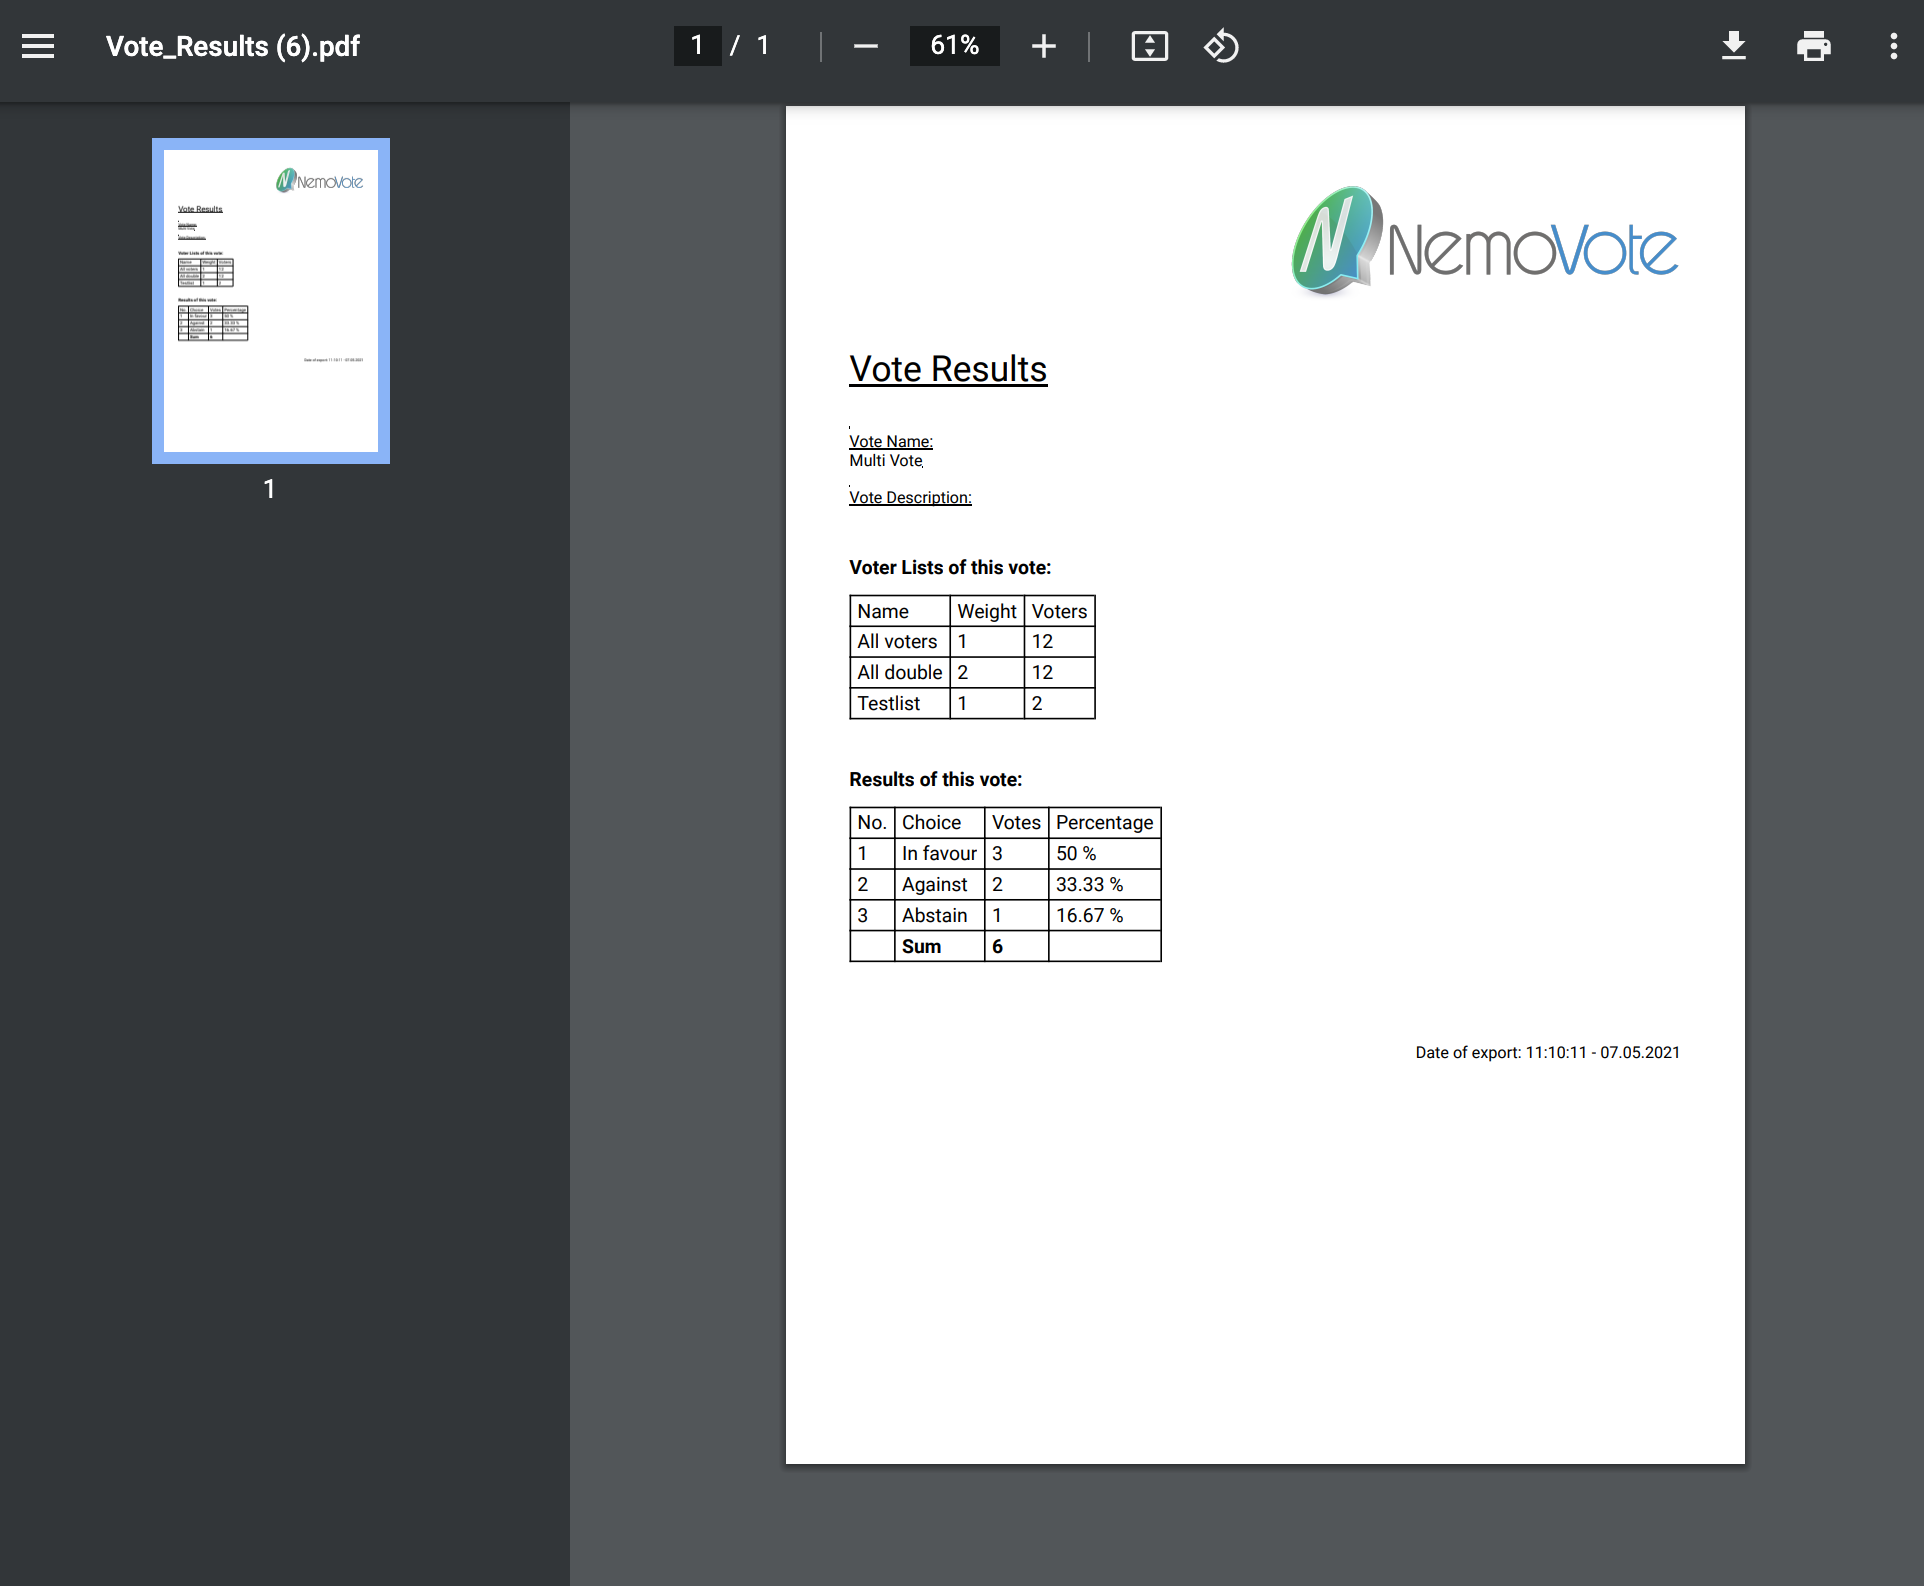 NemoVote export results directly to PDF